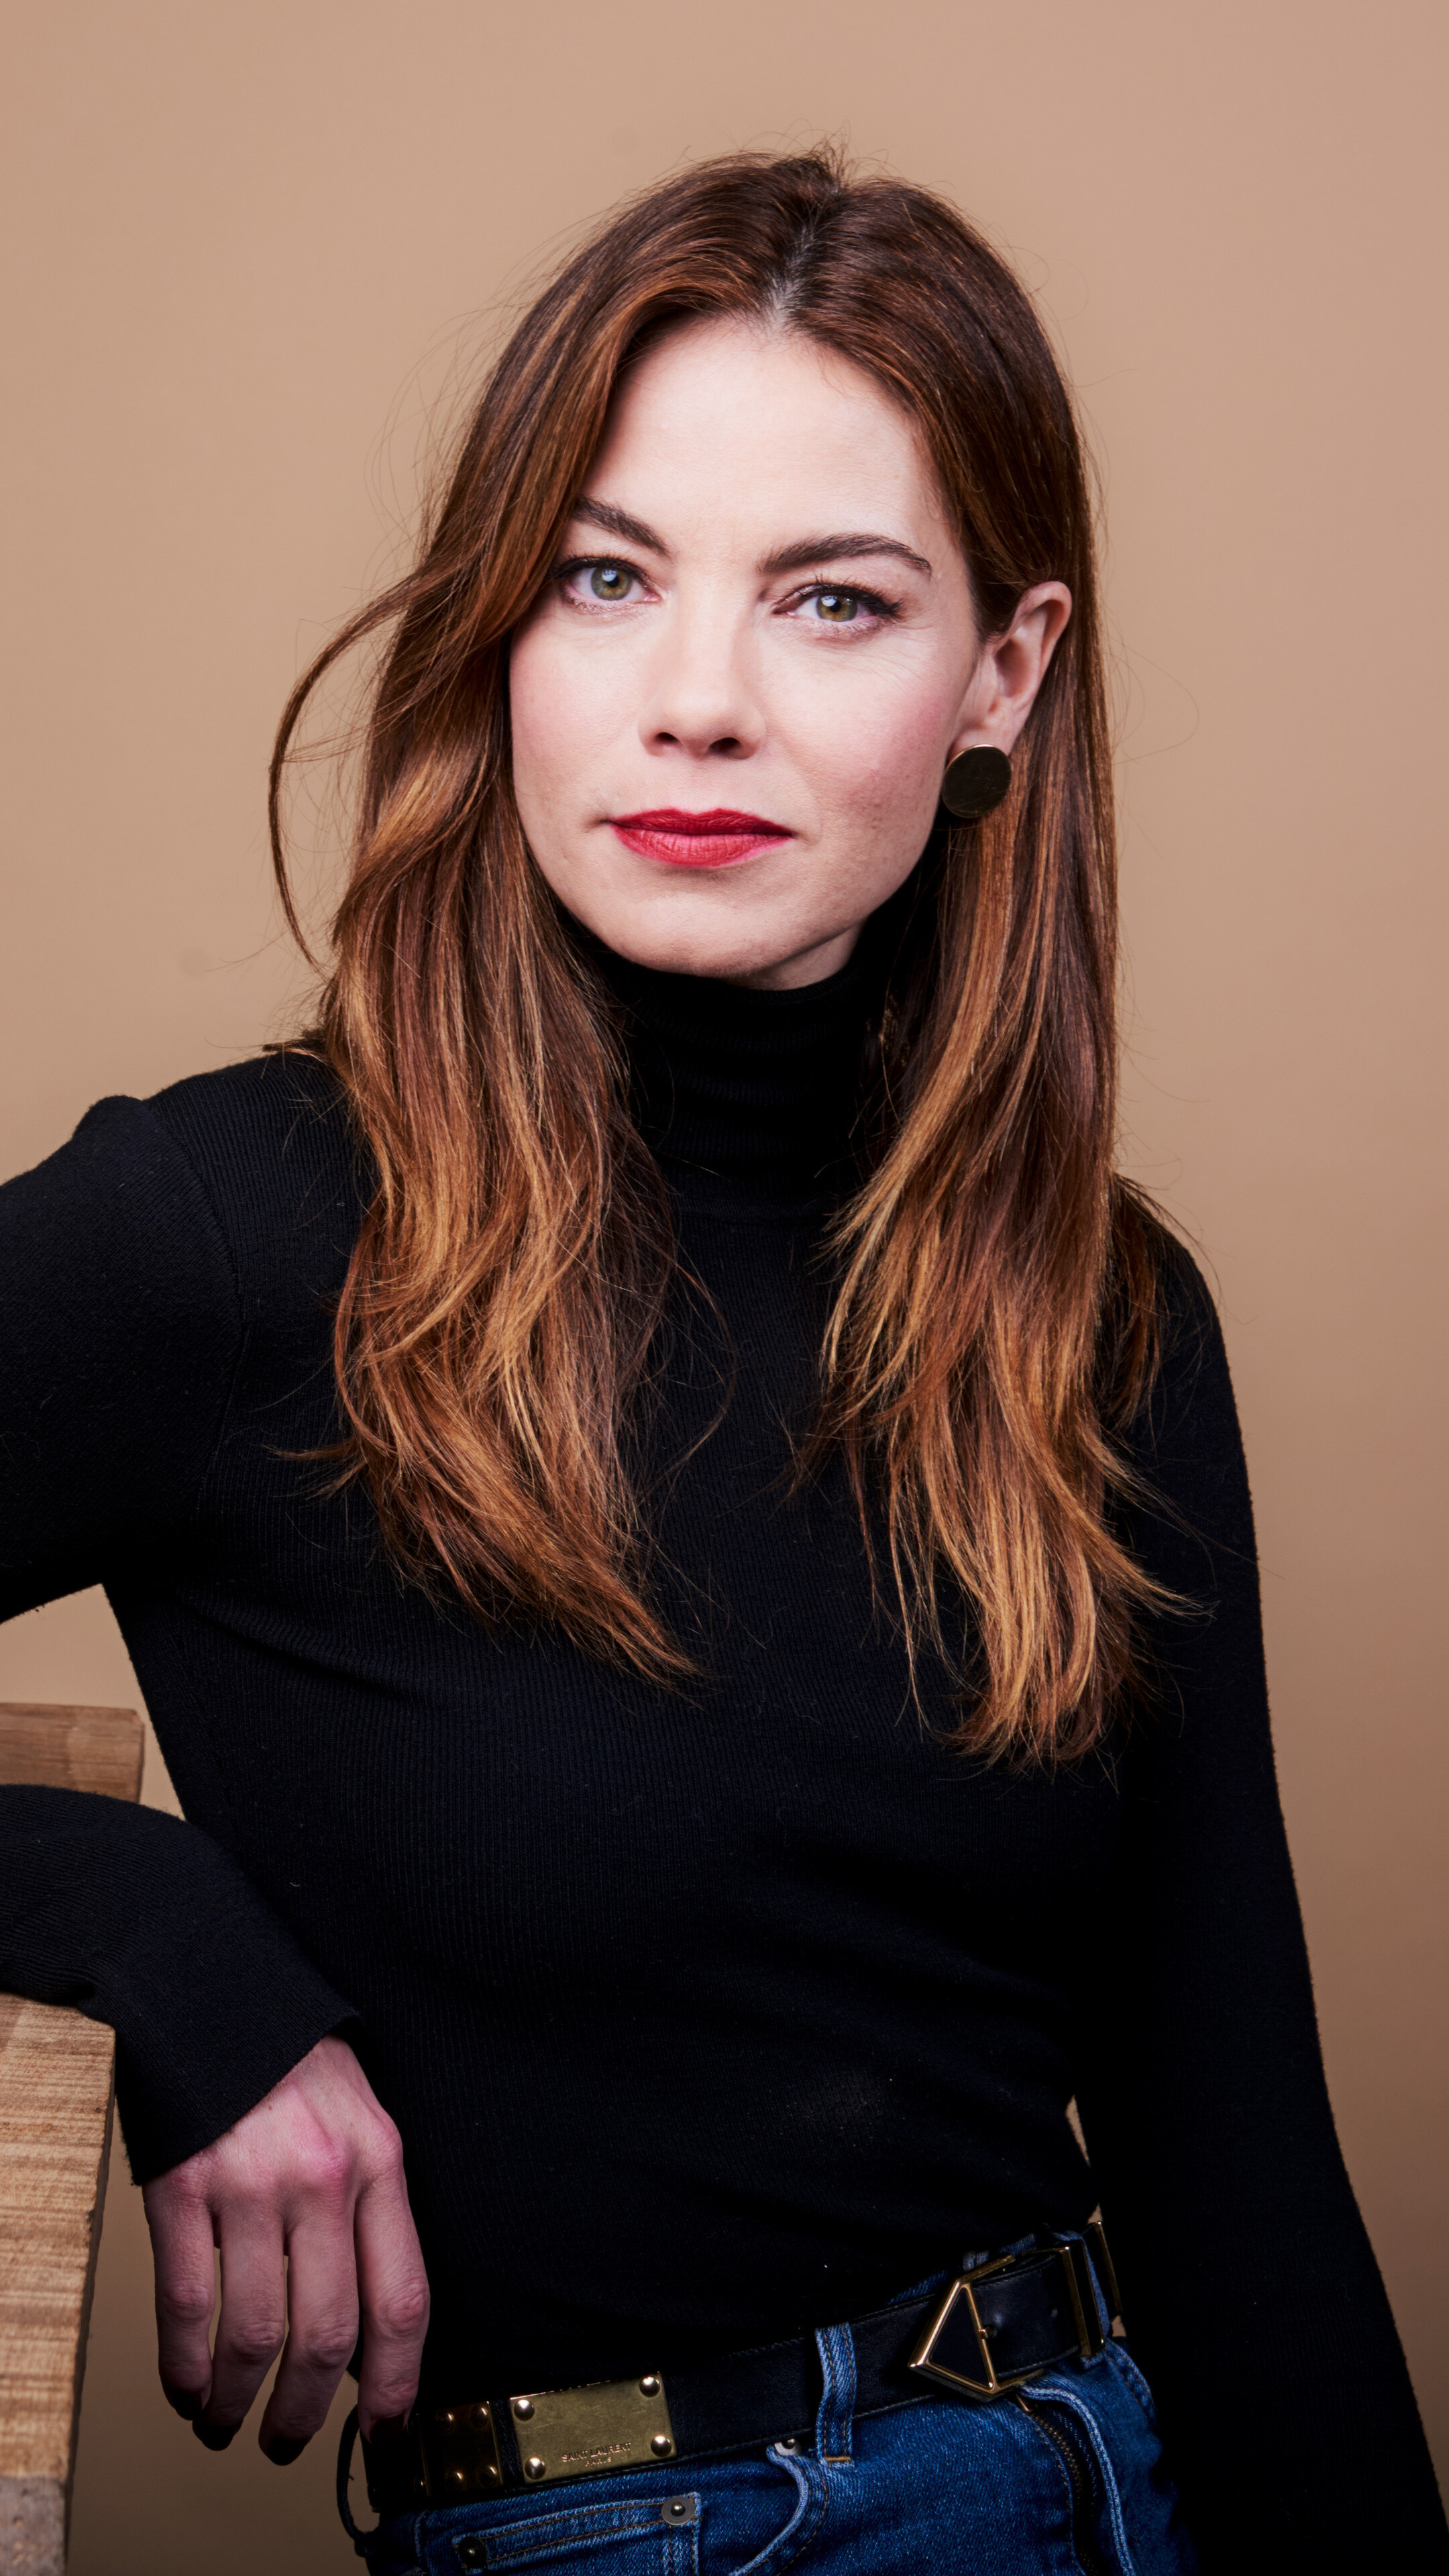 Michelle Monaghan: The actress, Starting career in mid 2000s, The former fashion model, Natural quick-wit and comedic talent. 2160x3840 4K Wallpaper.